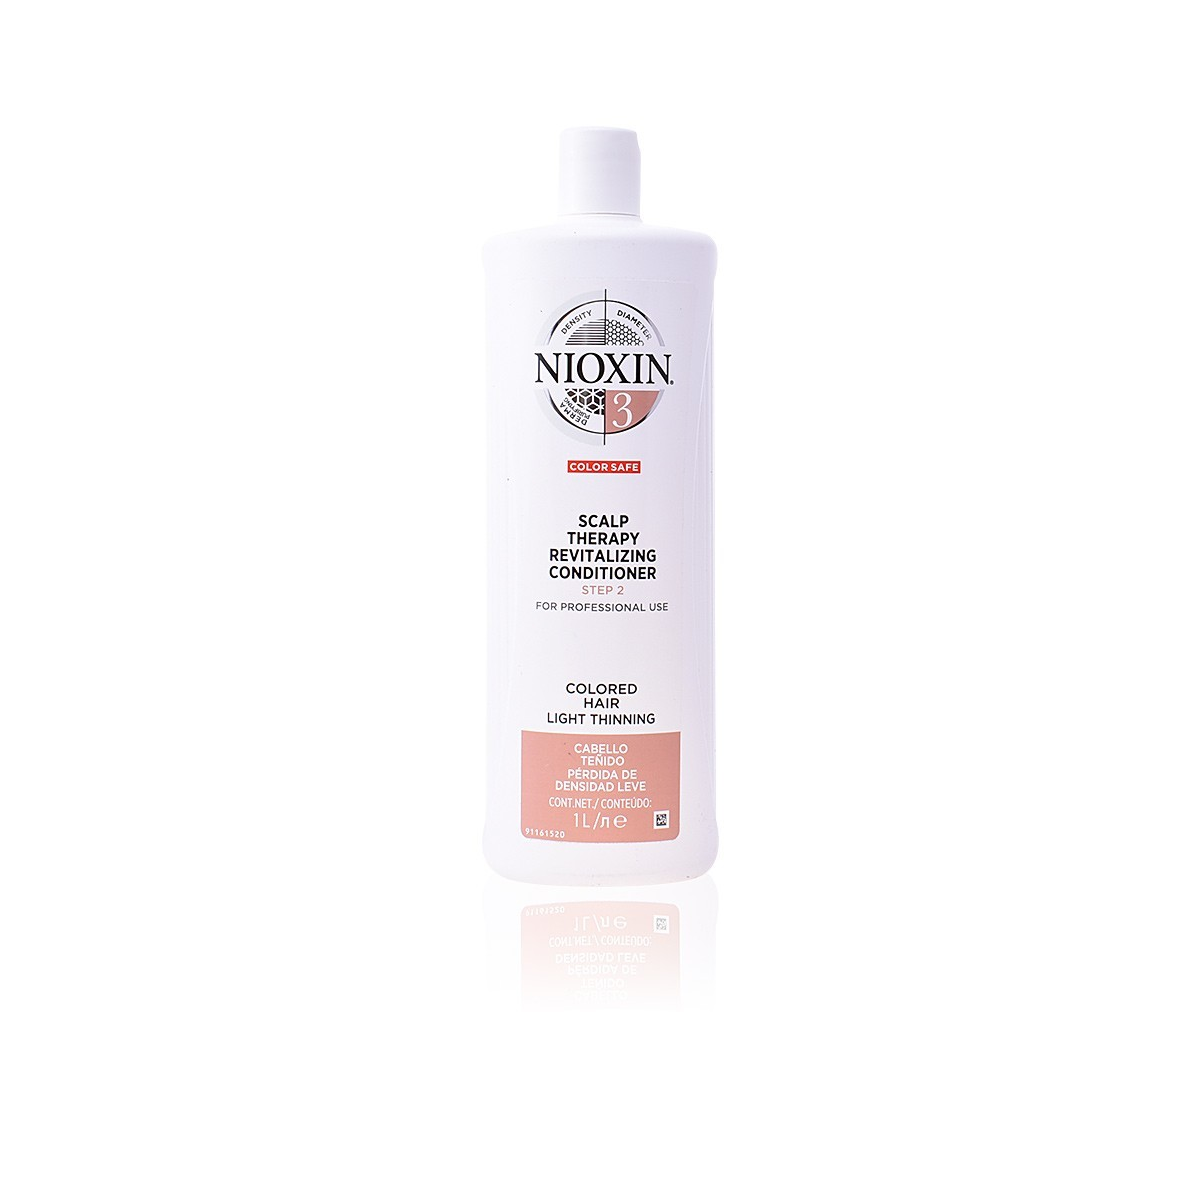 NIOXIN - SCALP THERAPY REVITALIZING CONDITIONER - COLORED HAIR LIGHT THINNING (1Litro) Shampoo purificante